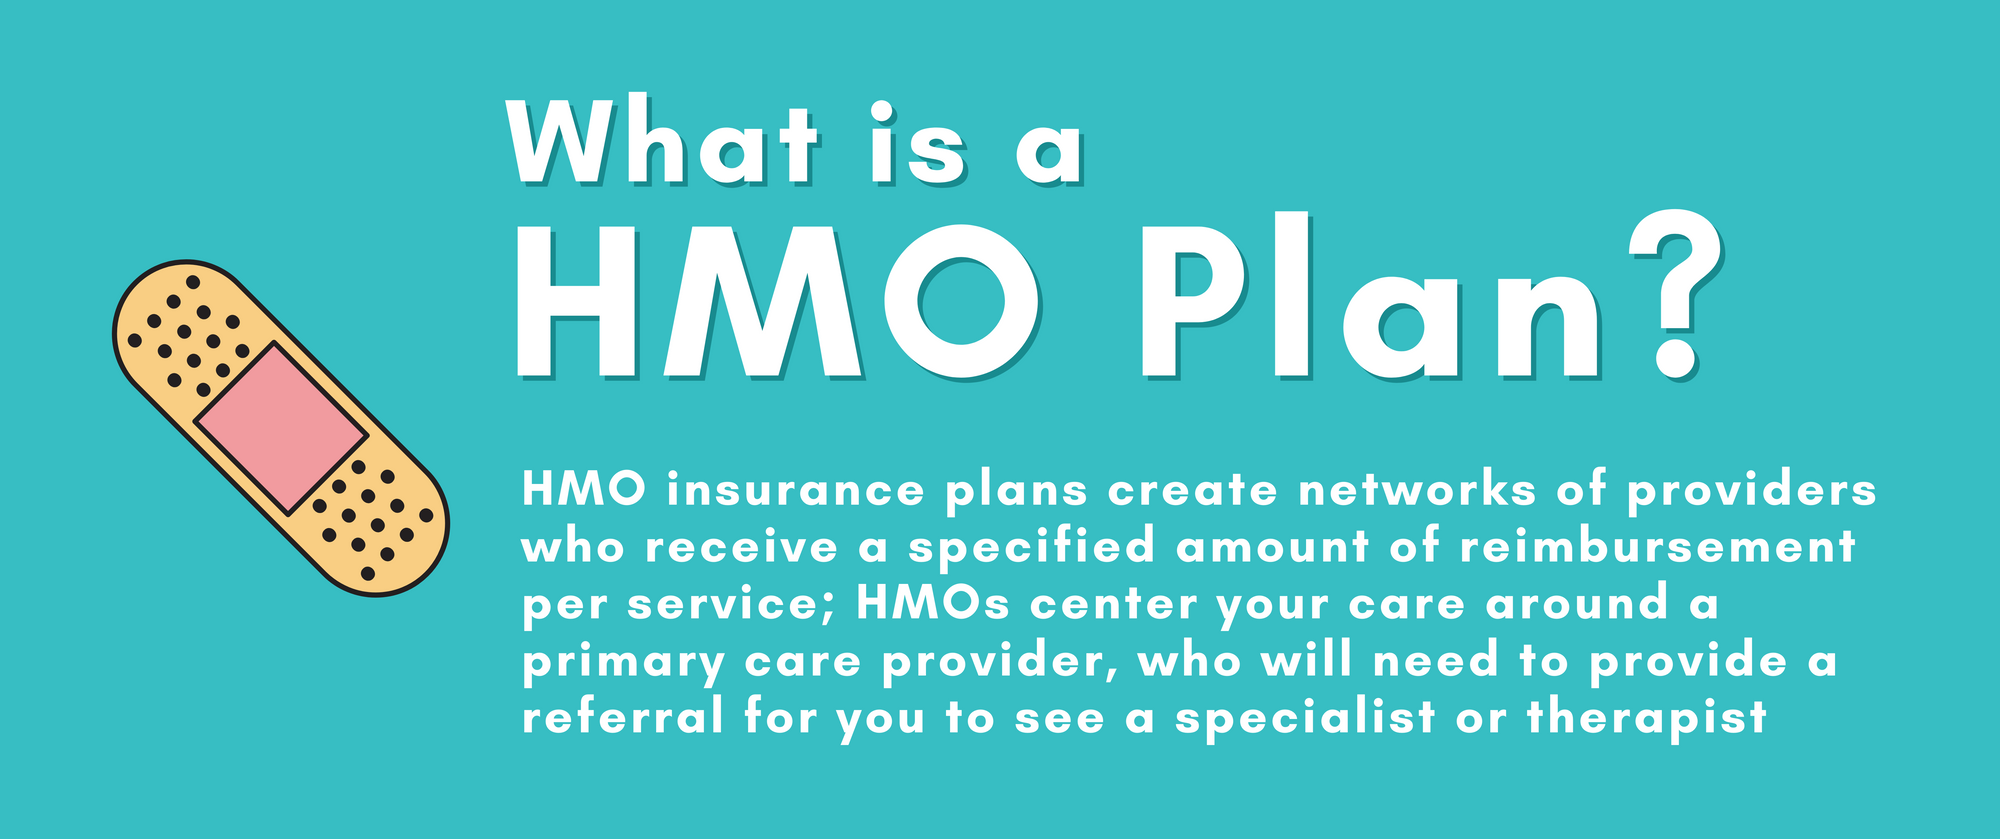 what-is-an-hmo-plan-health-insurance-explained-zencare-blog